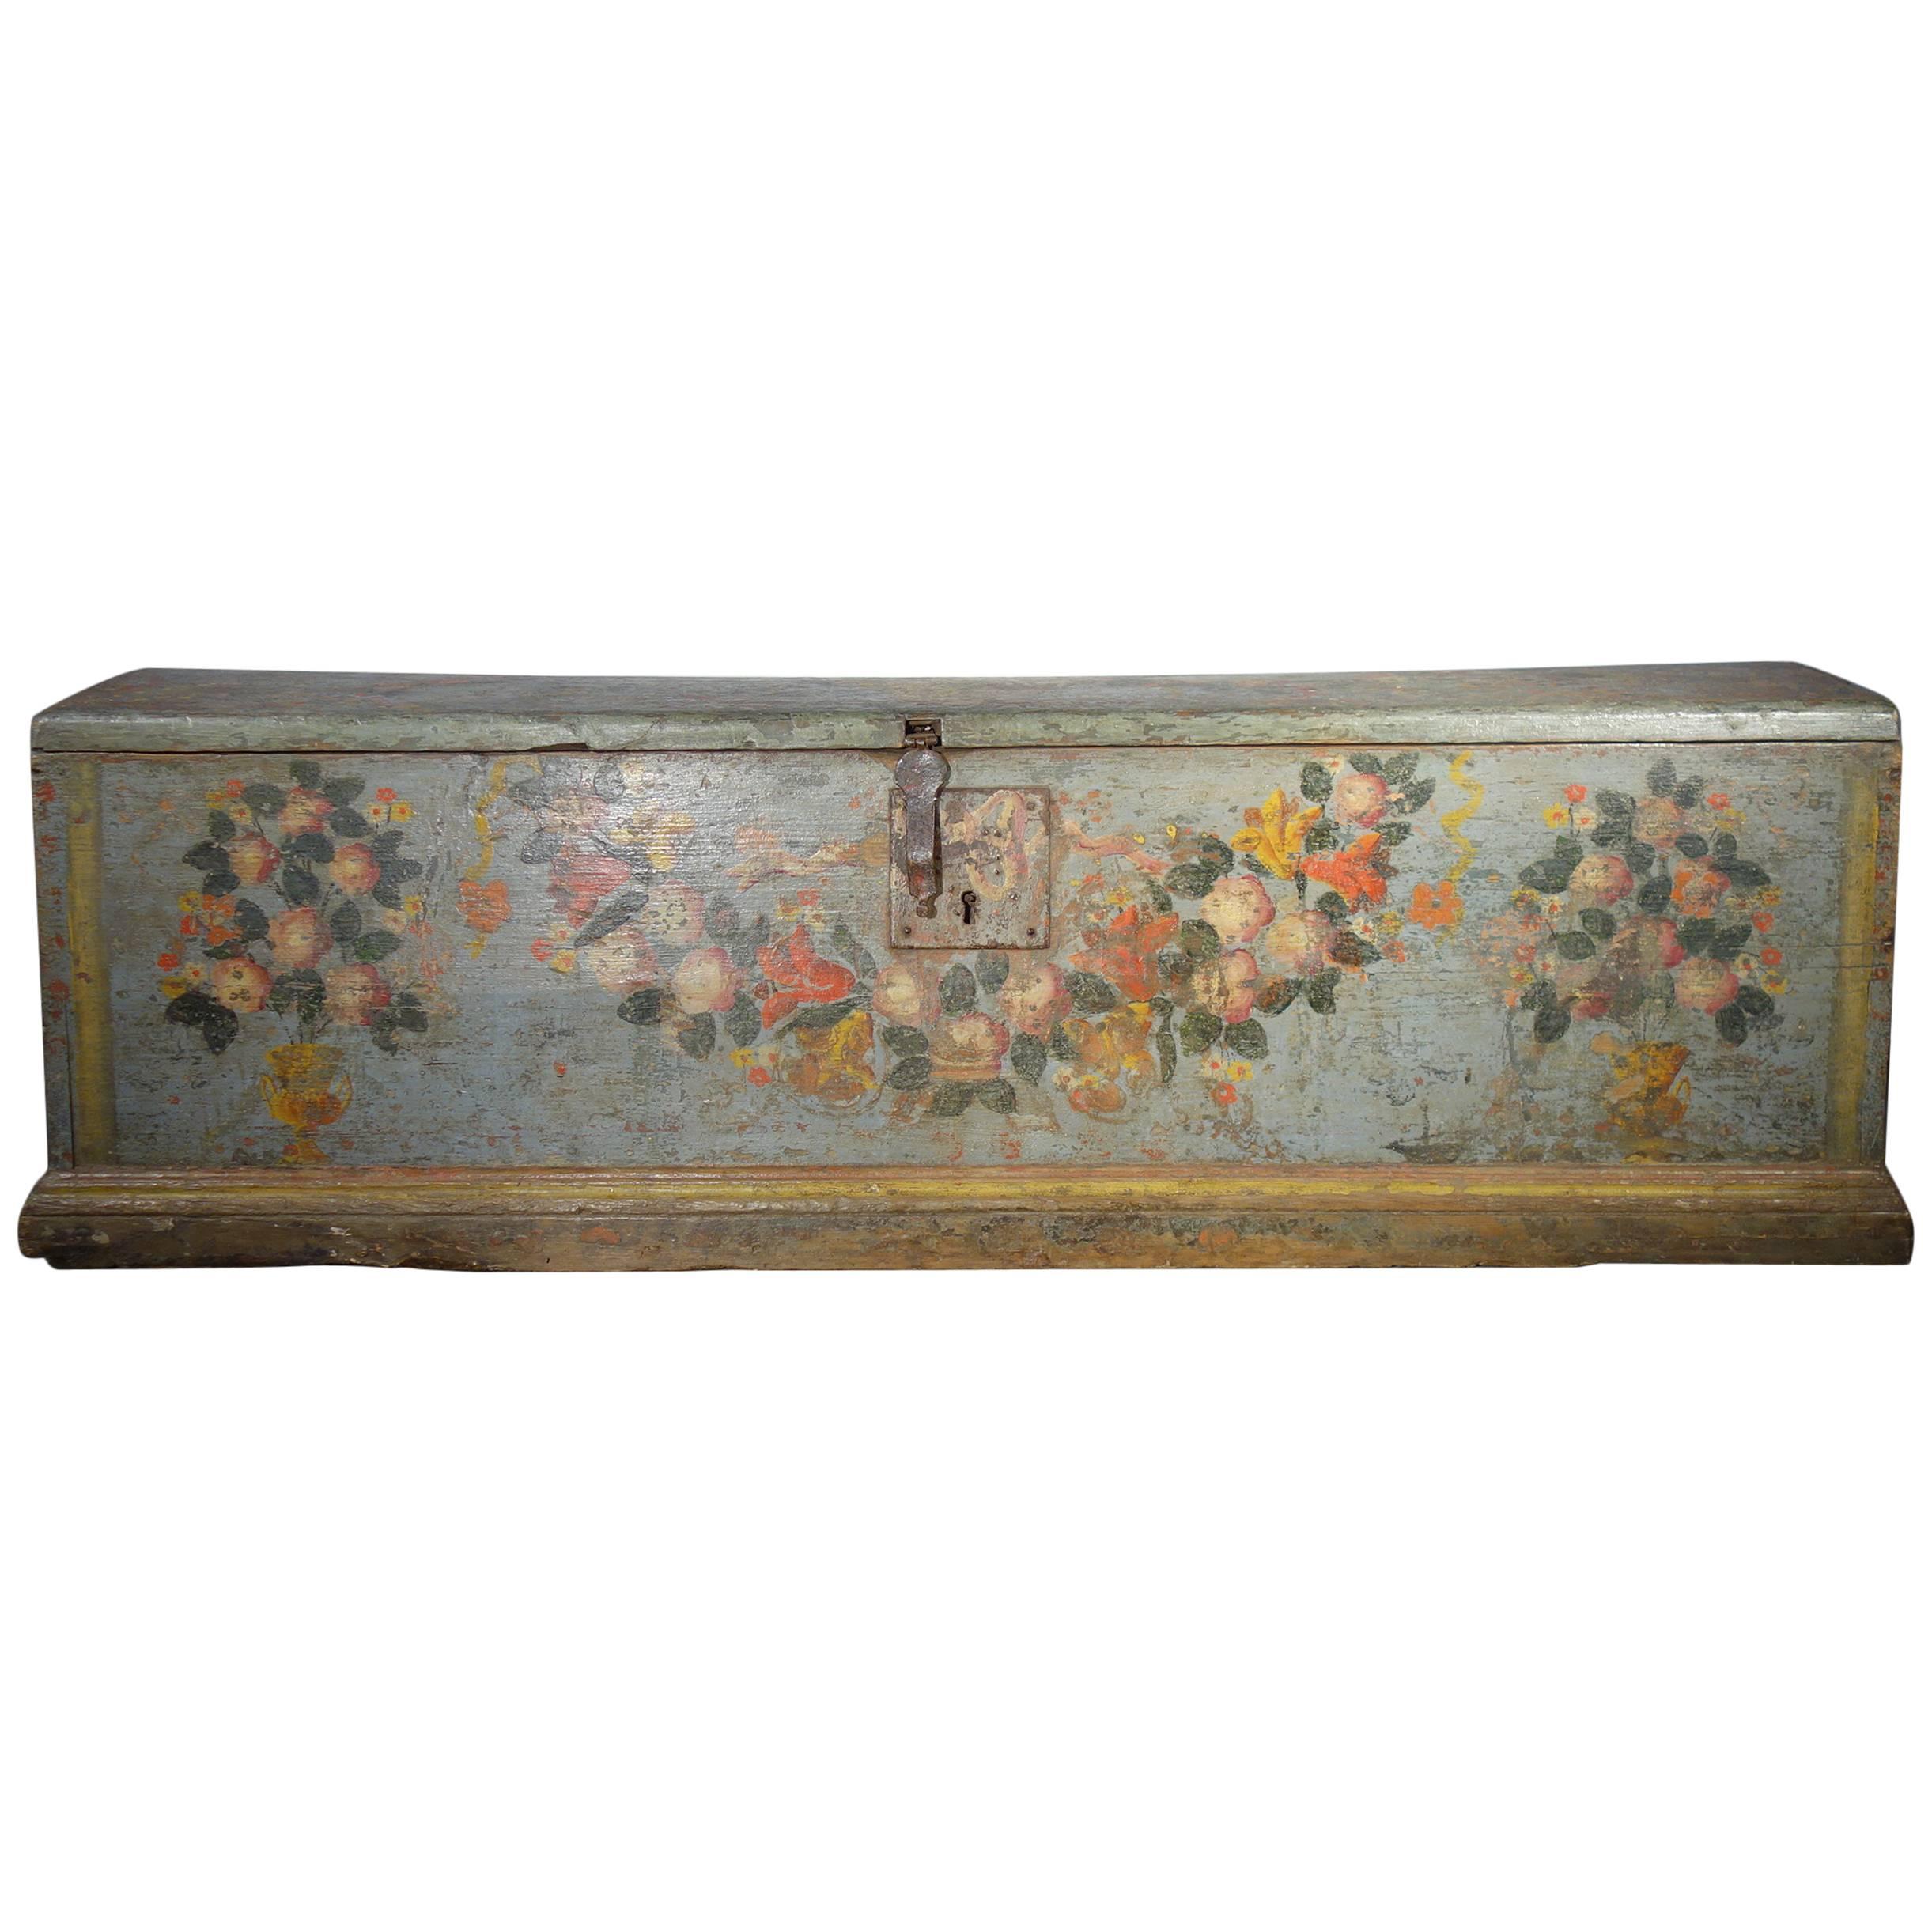 Italian, Early 18th Century Sicilian Painted Nuptial Trunk